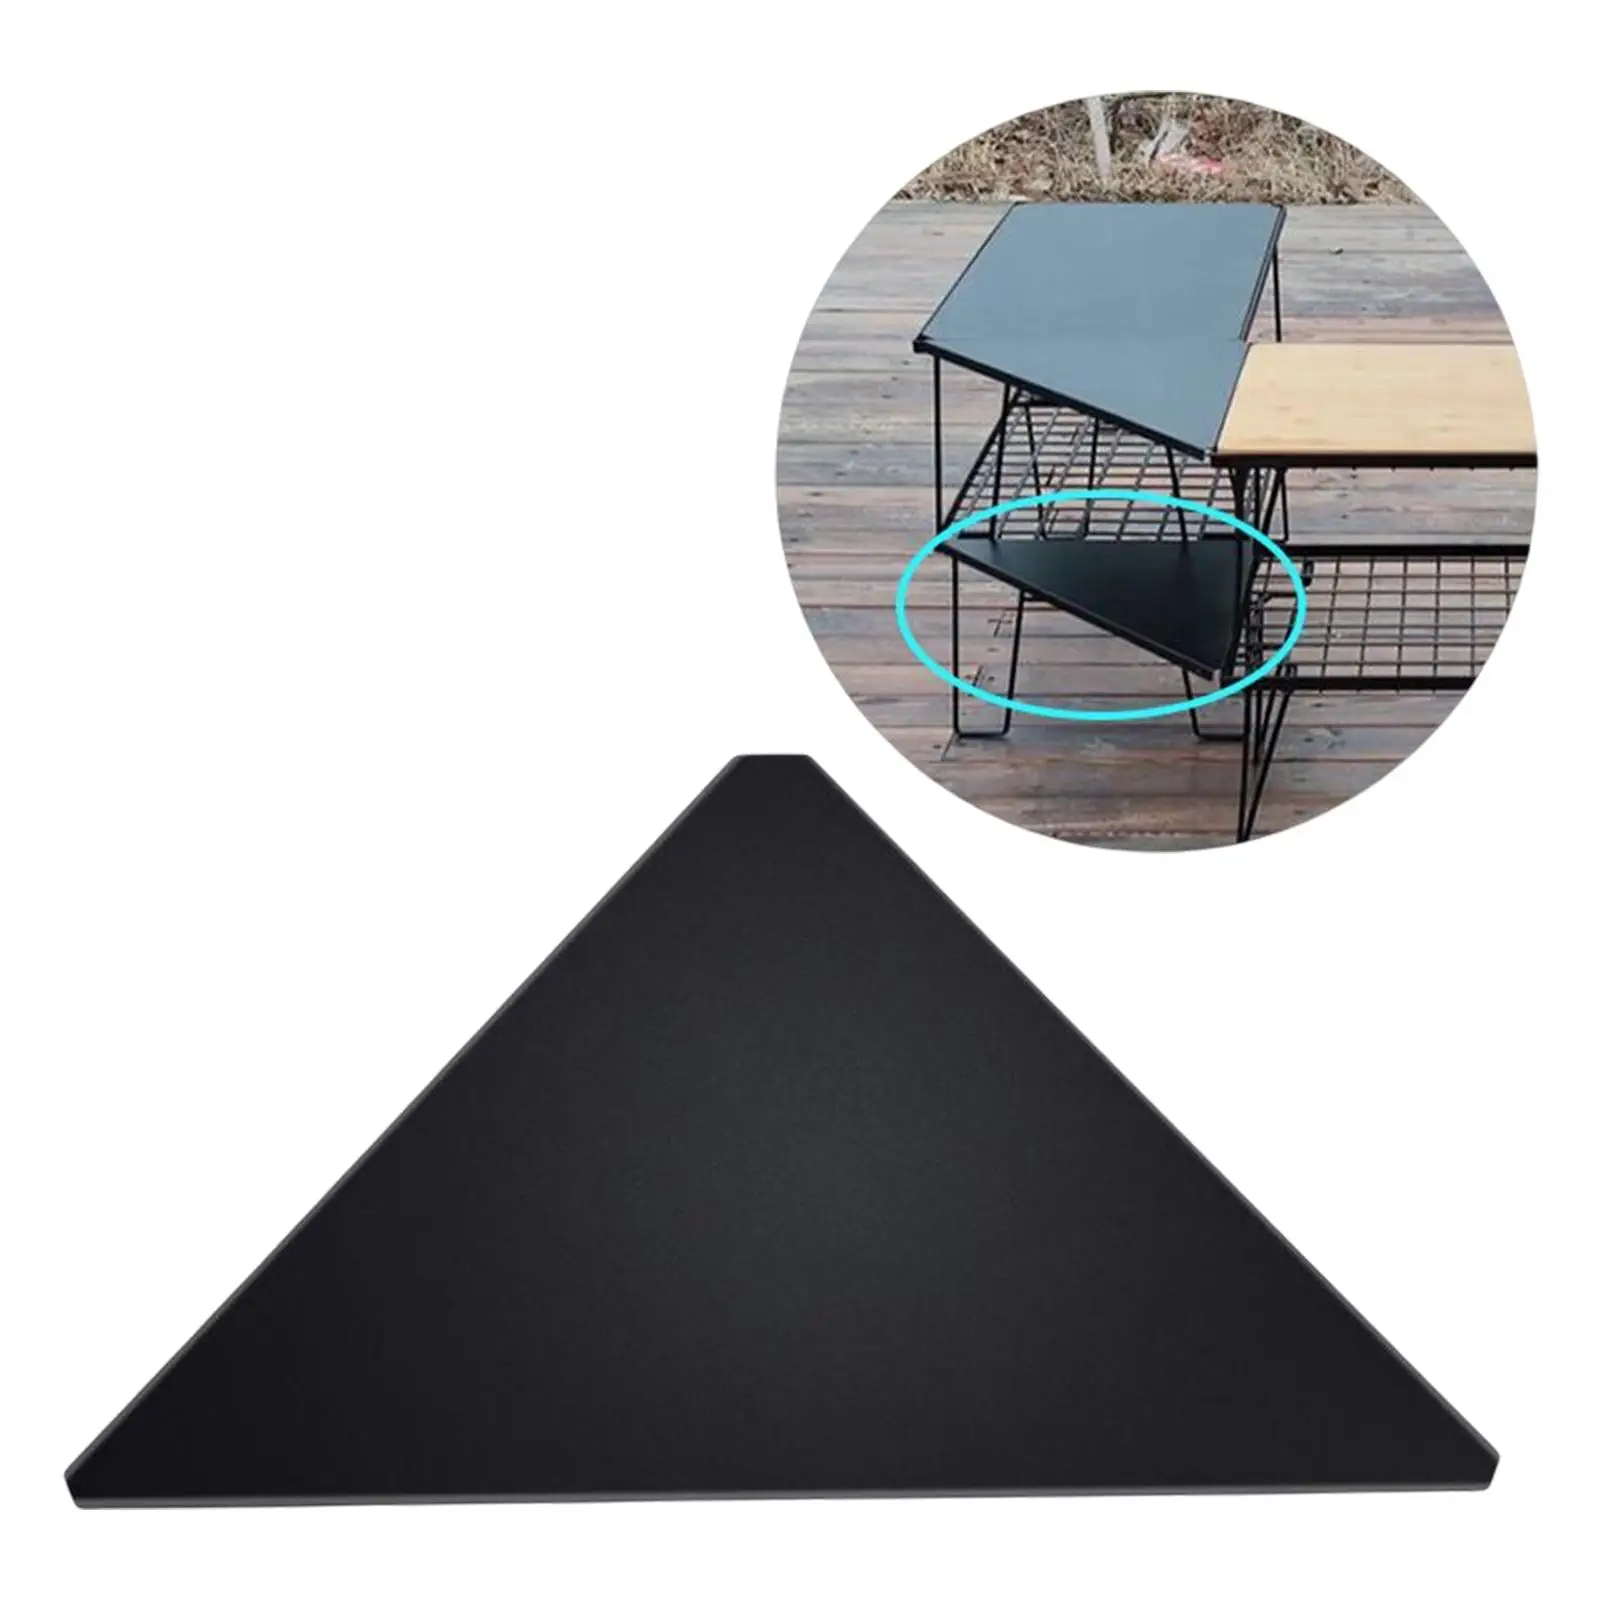 Camping Table Board Outdoor Matching with Iron Net Table Portable Desk Board for Mountaineering Backpacking Beach Picnic Cooking